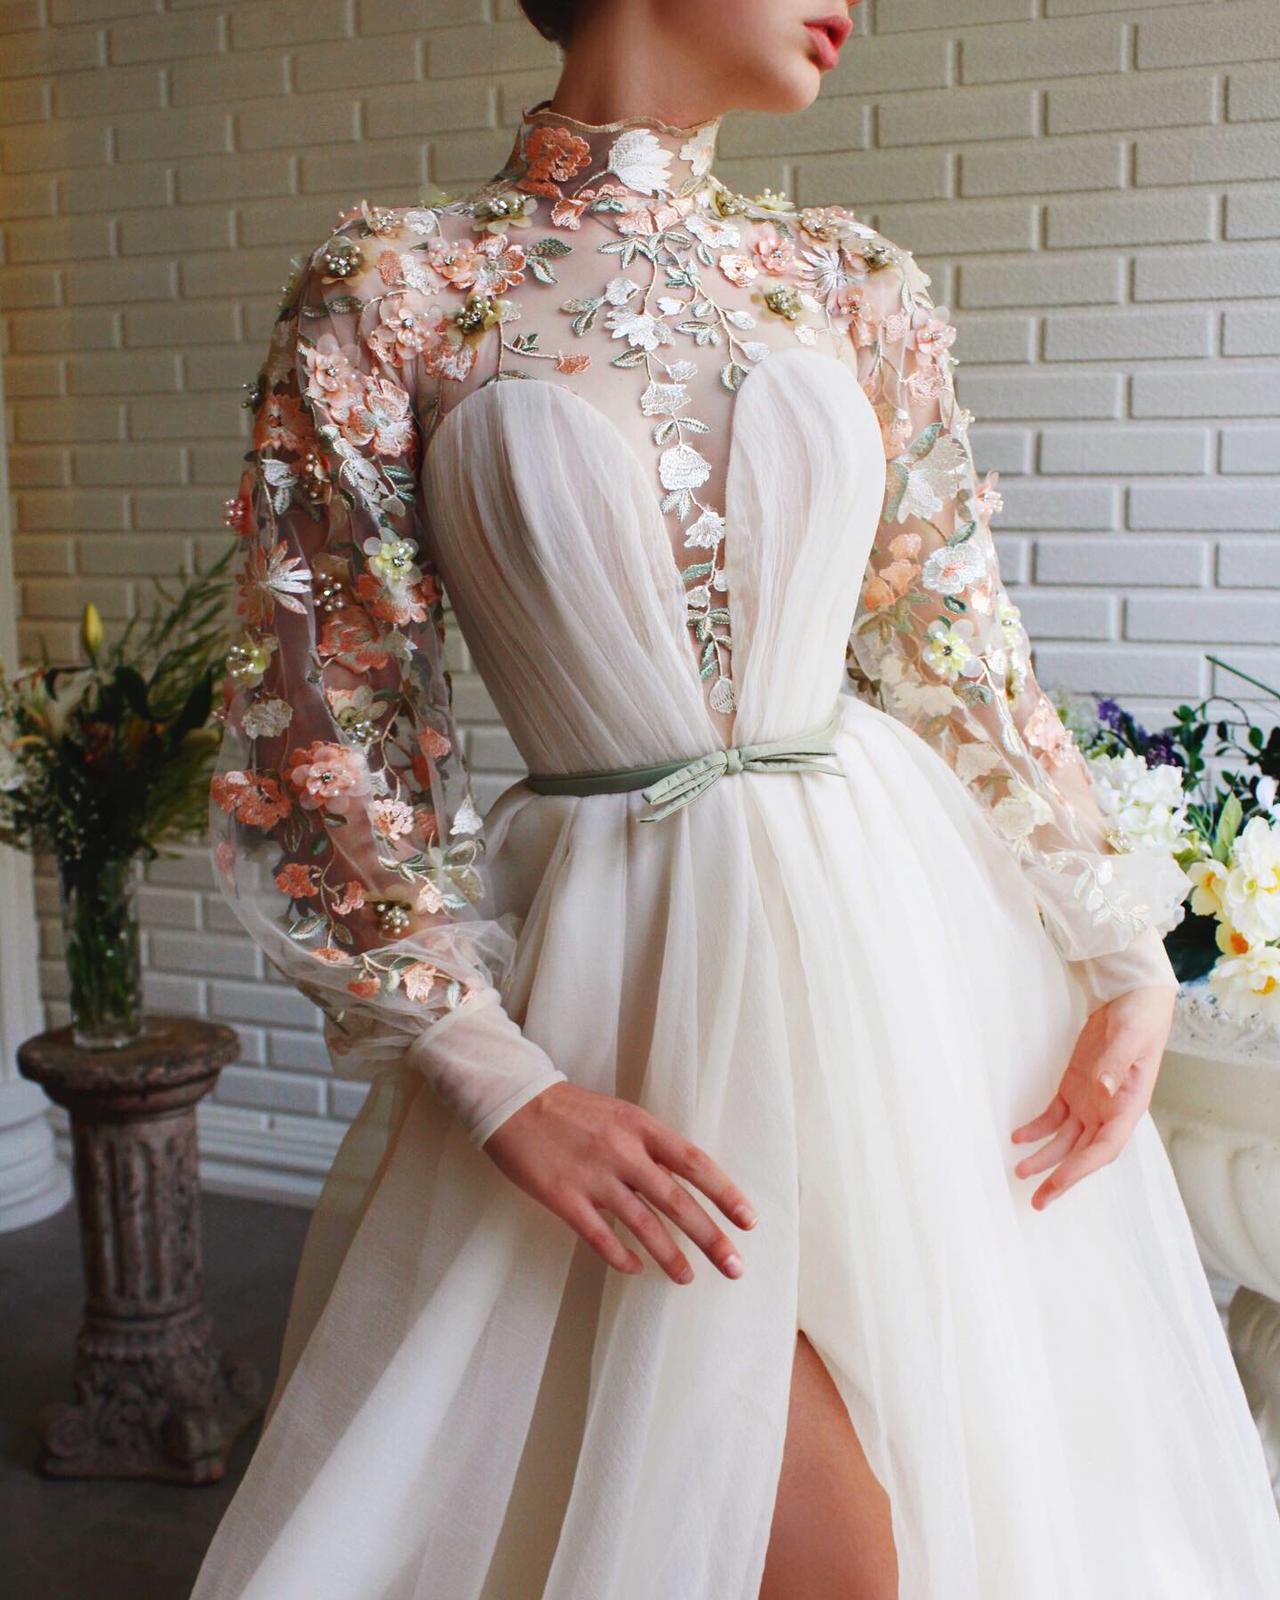 Beige A-Line dress with long sleeves and embroidery